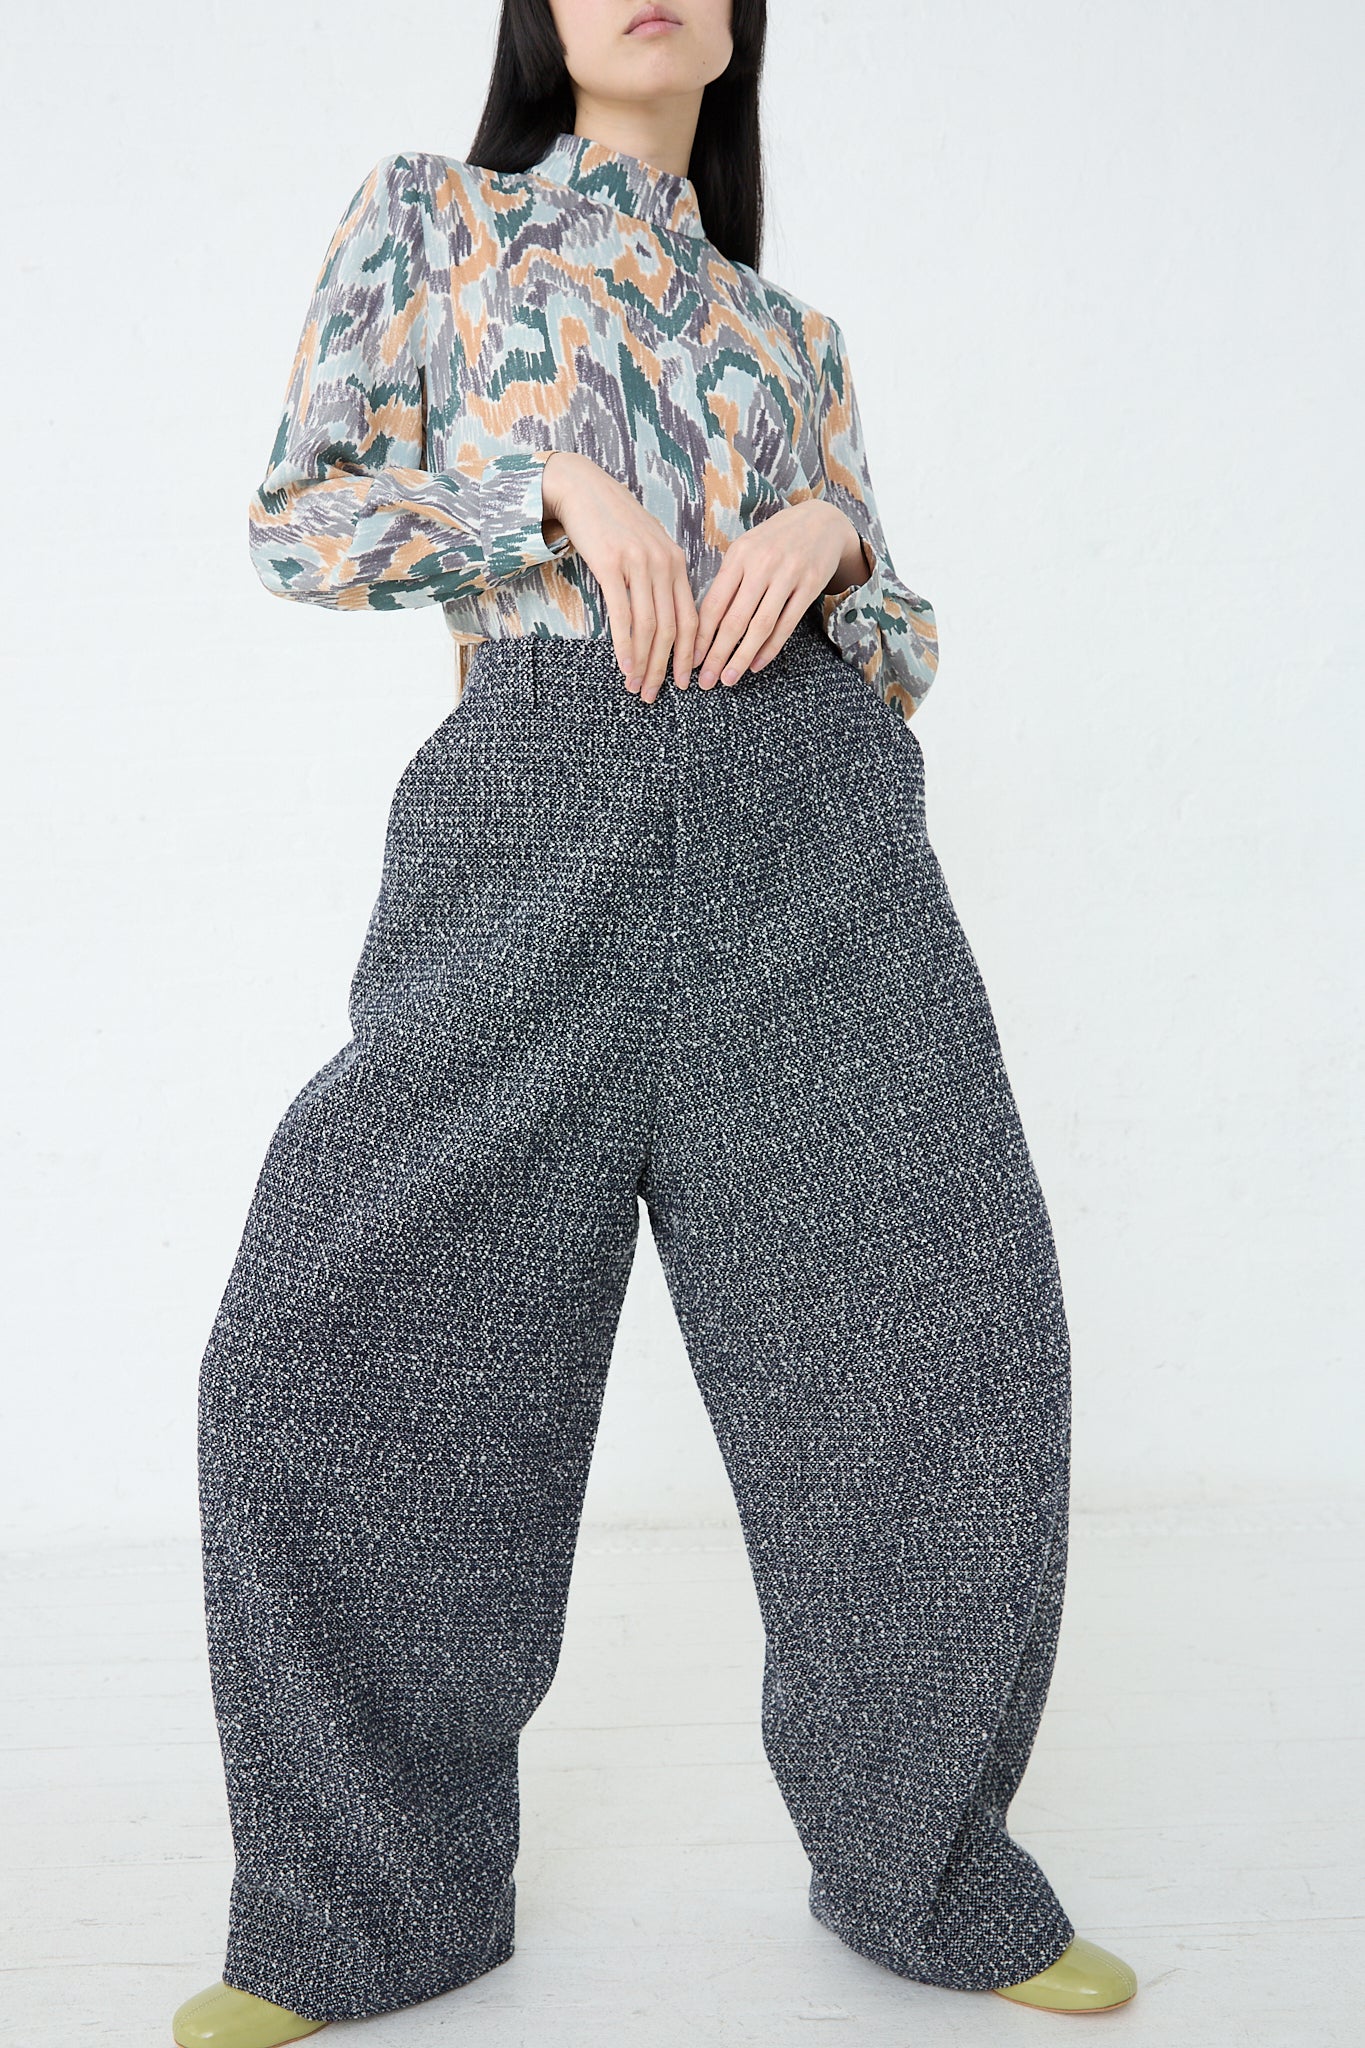 A woman wearing Mina Perhonen's Predawn Trouser in Navy Mix made in Japan and a floral blouse with a relaxed fit.